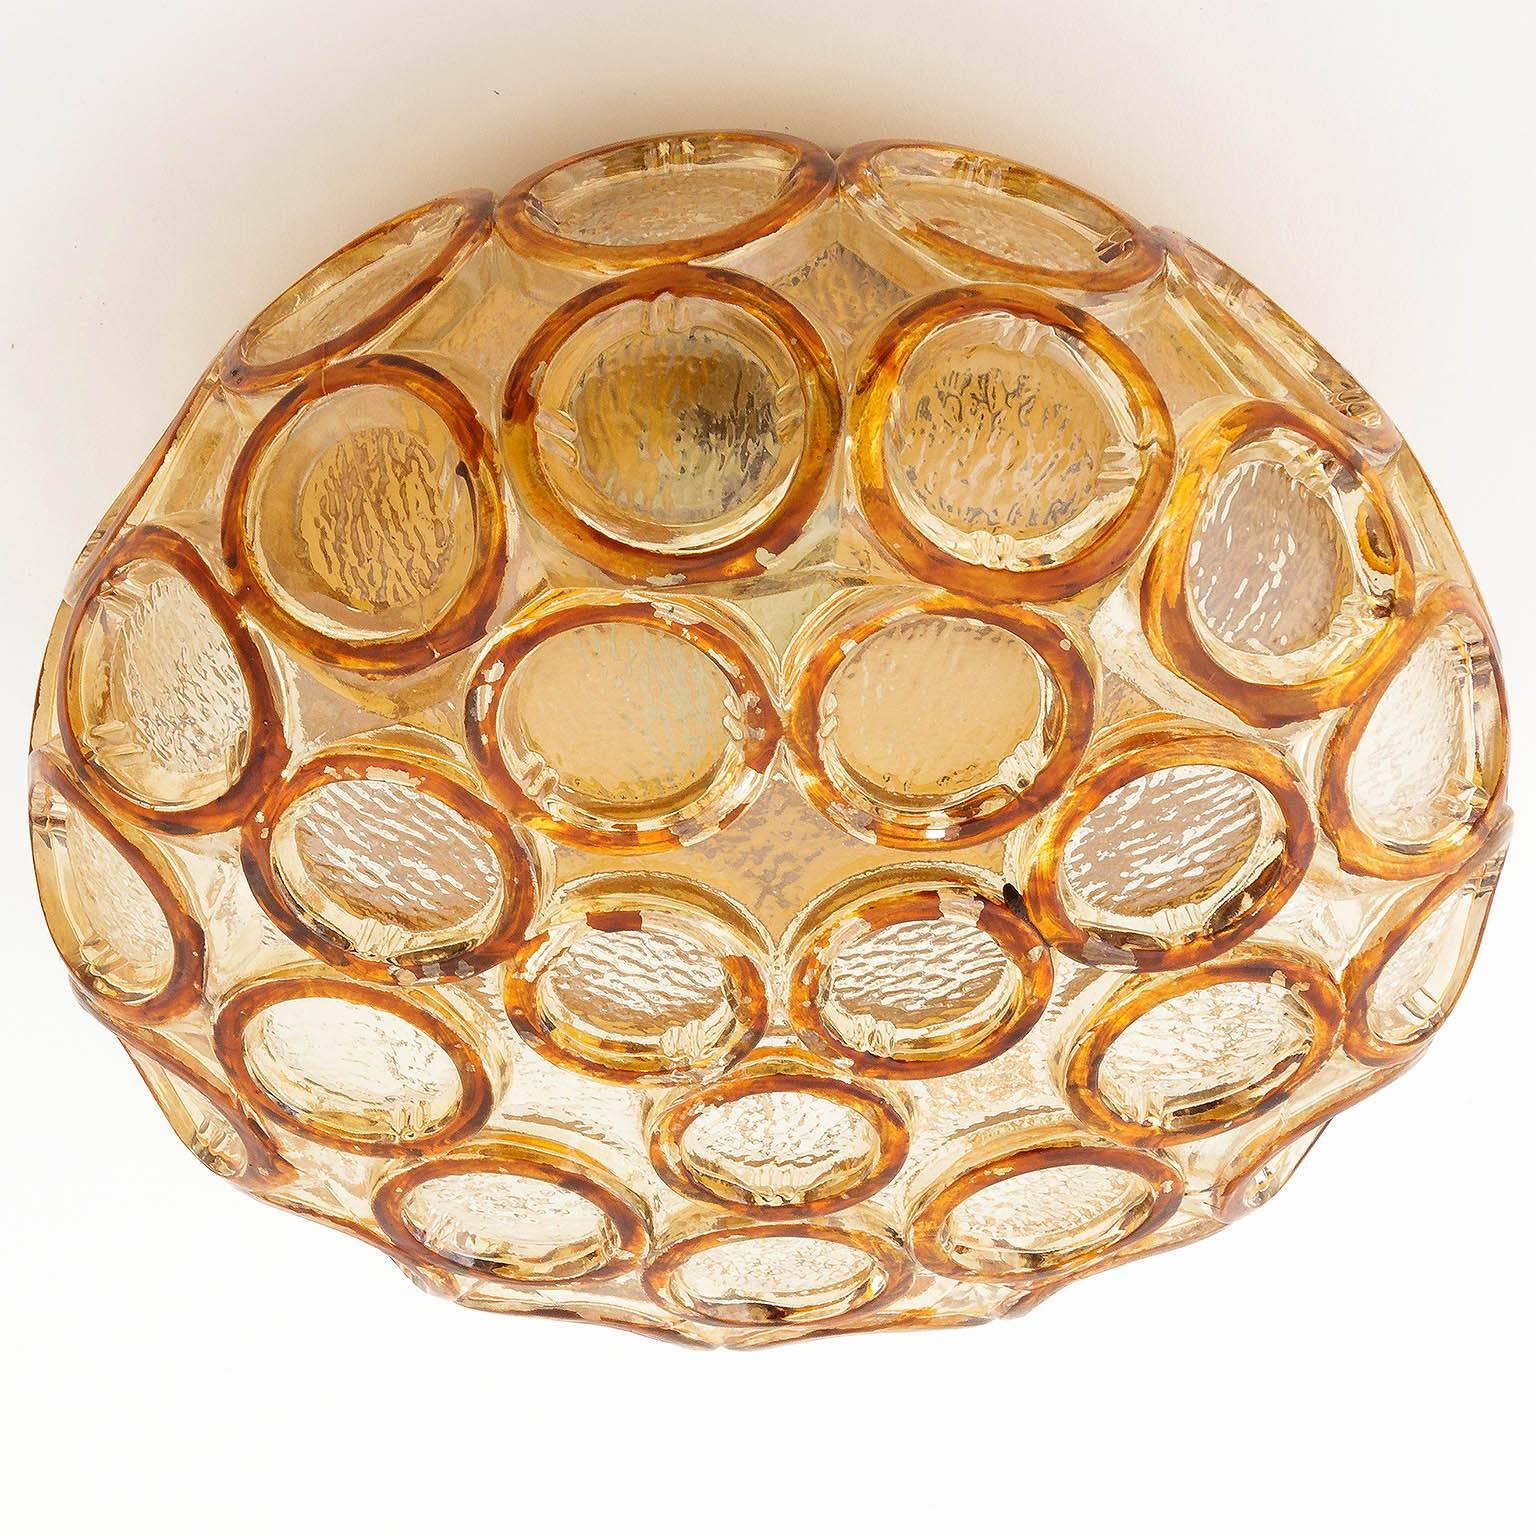 A set of three amber tone glass light fixtures in the style of Limburg, manufactured in Mid-Century (1960s-1970s). They can be used as wall or ceiling lamps. Each lamp is an original vintage piece with some flaking to the colored rings and a gold